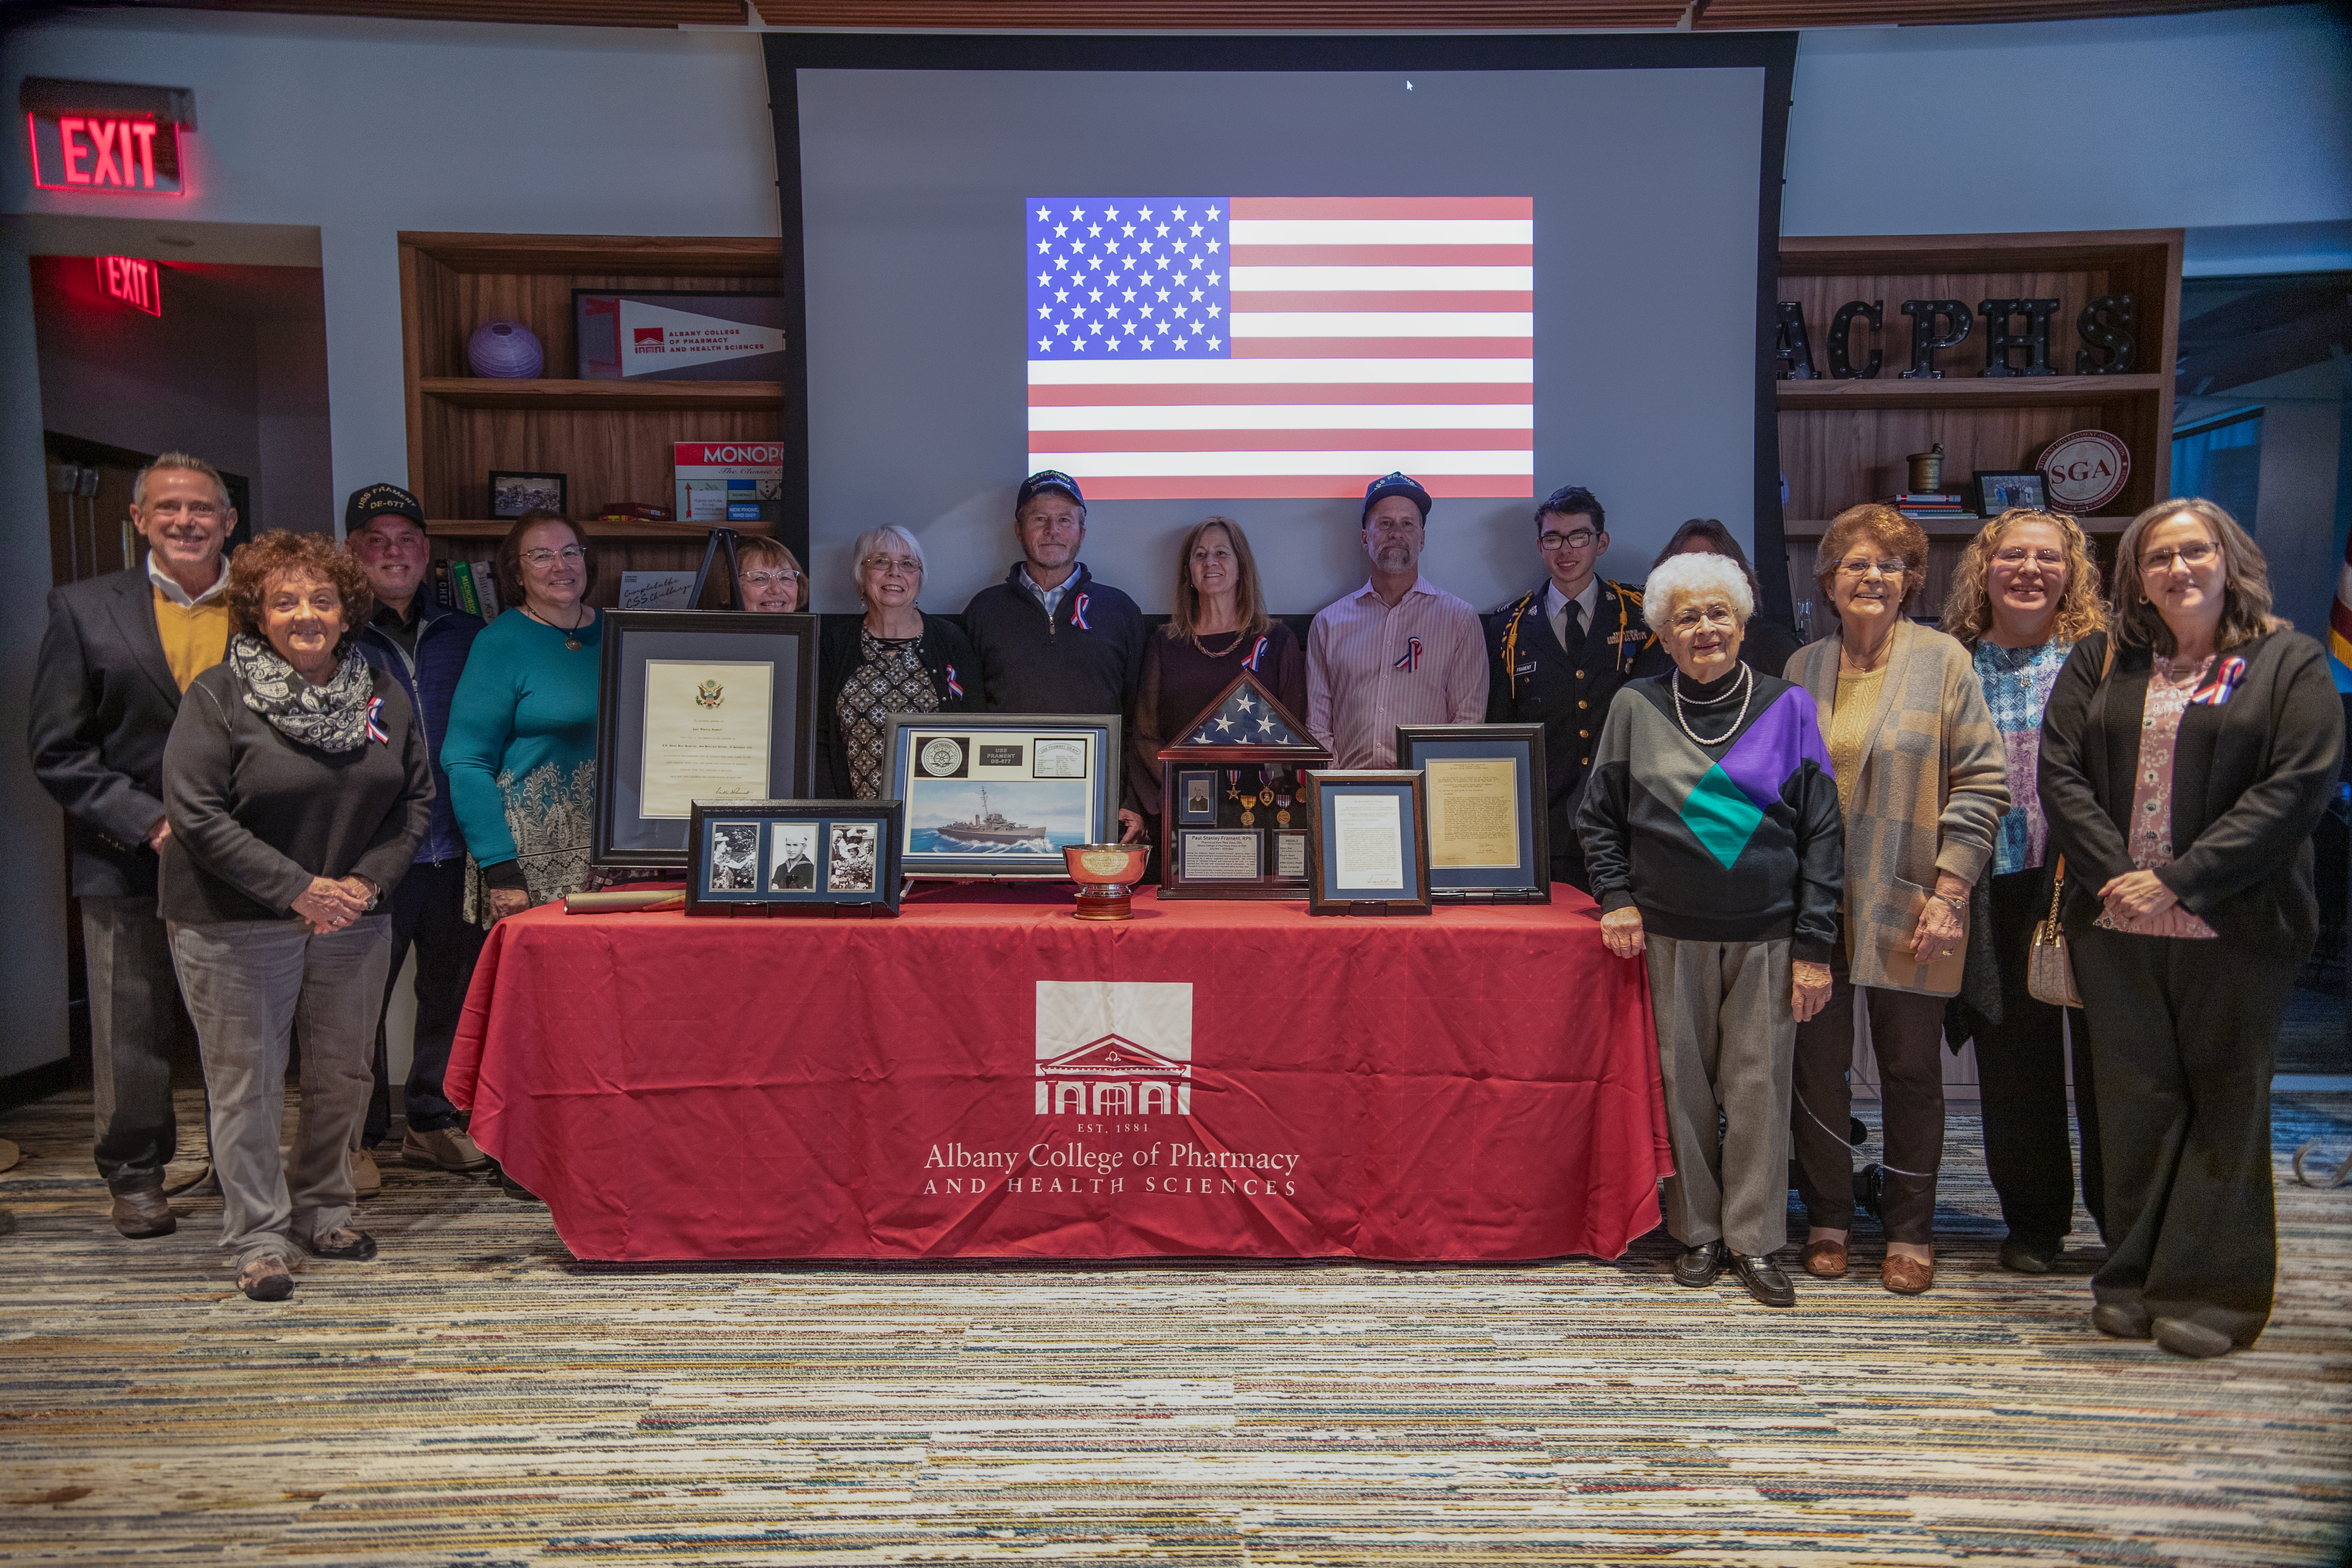 Relatives of Paul Stanley Frament '39 gathered around the artifacts they donated to the College.